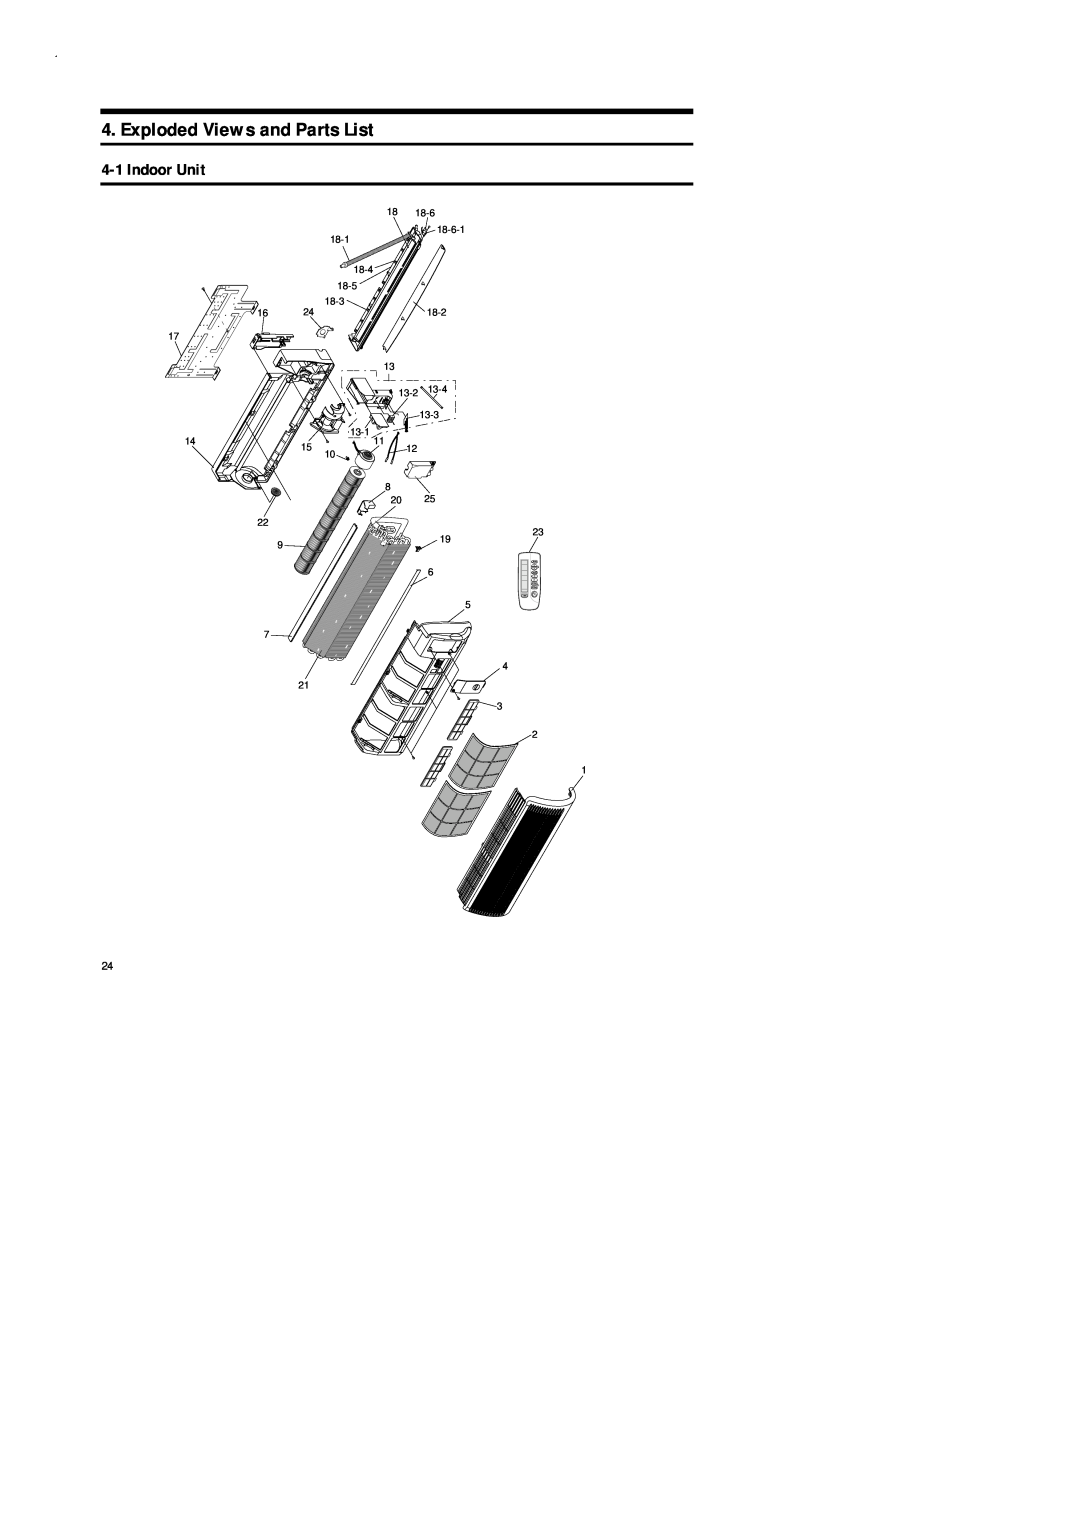 Samsung UD18B1C2, UD26B1C2, AD18B1C09, AD26B1C13 service manual Exploded Views and Parts List, 4-1Indoor Unit 